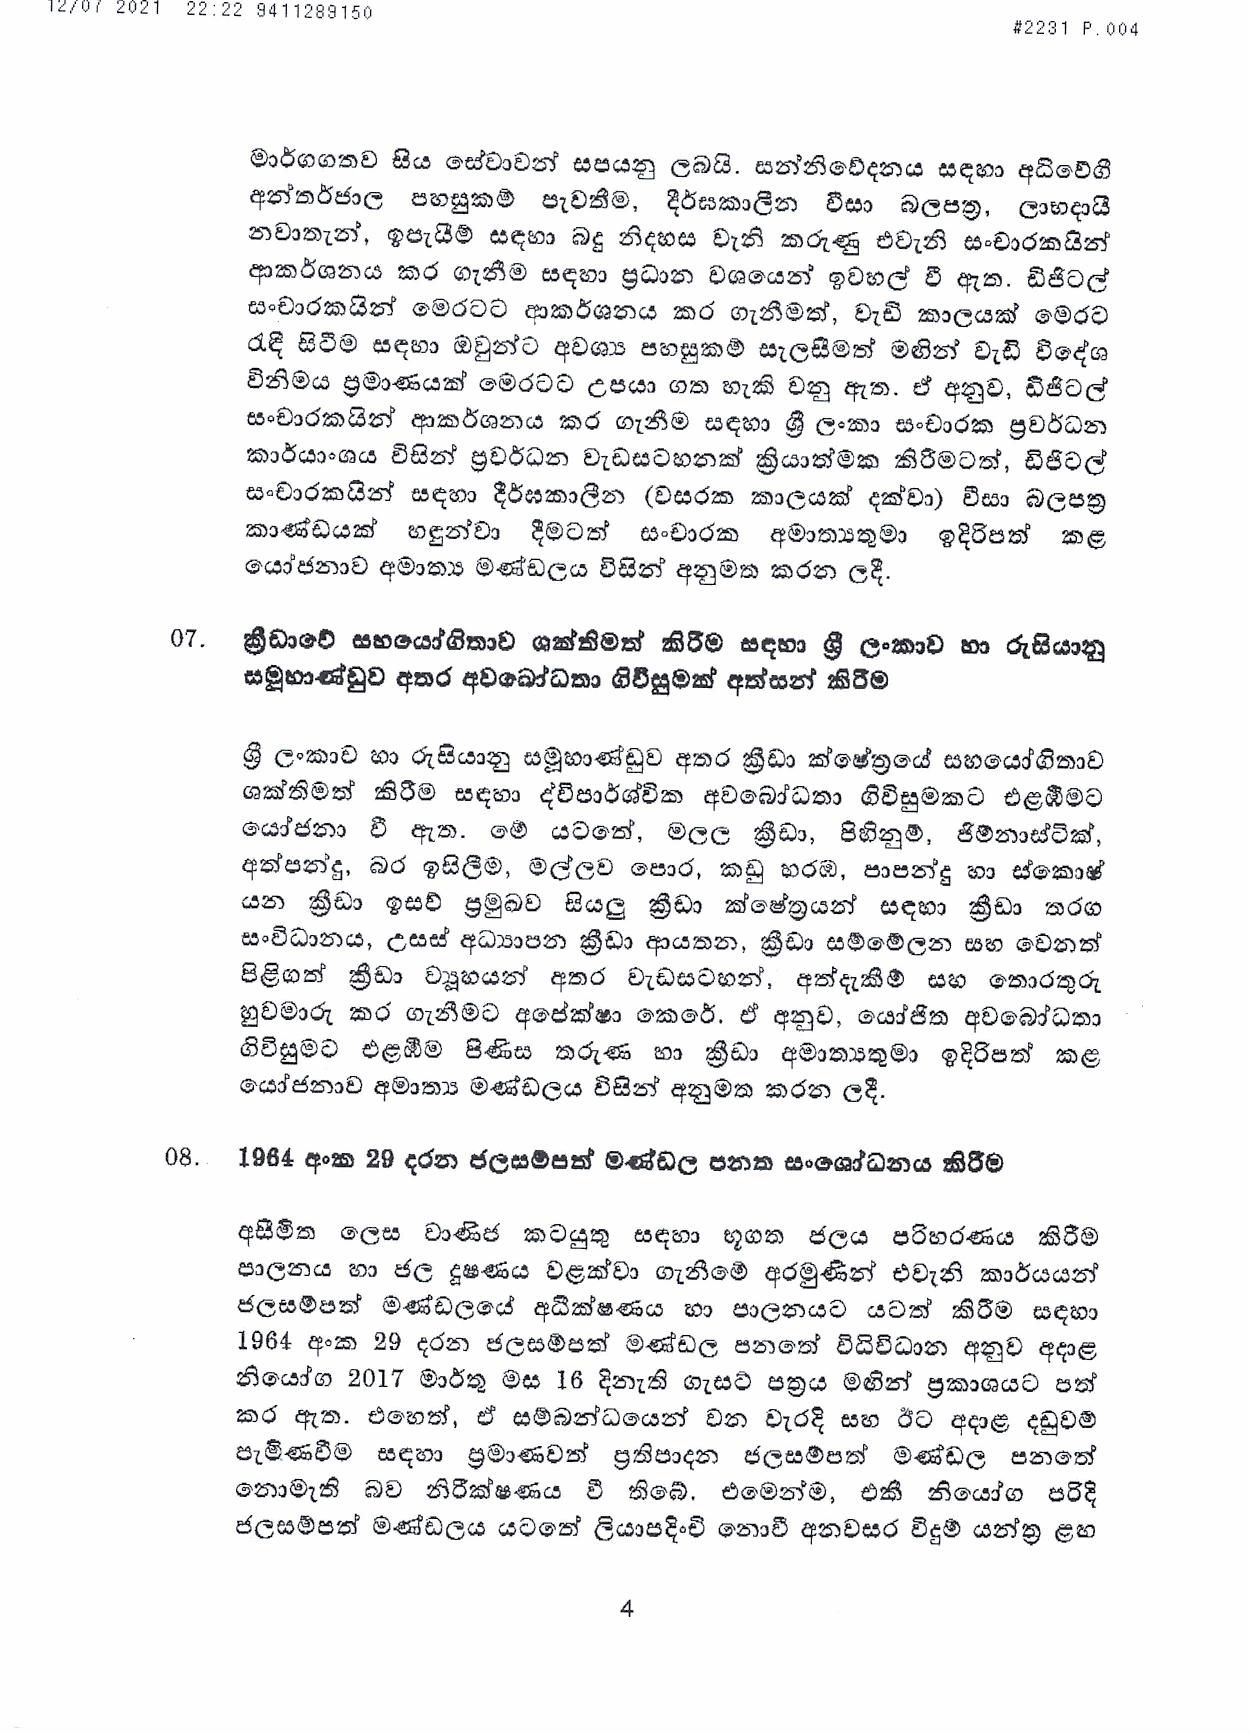 Cabinet Decision on 12.07.2021 page 004